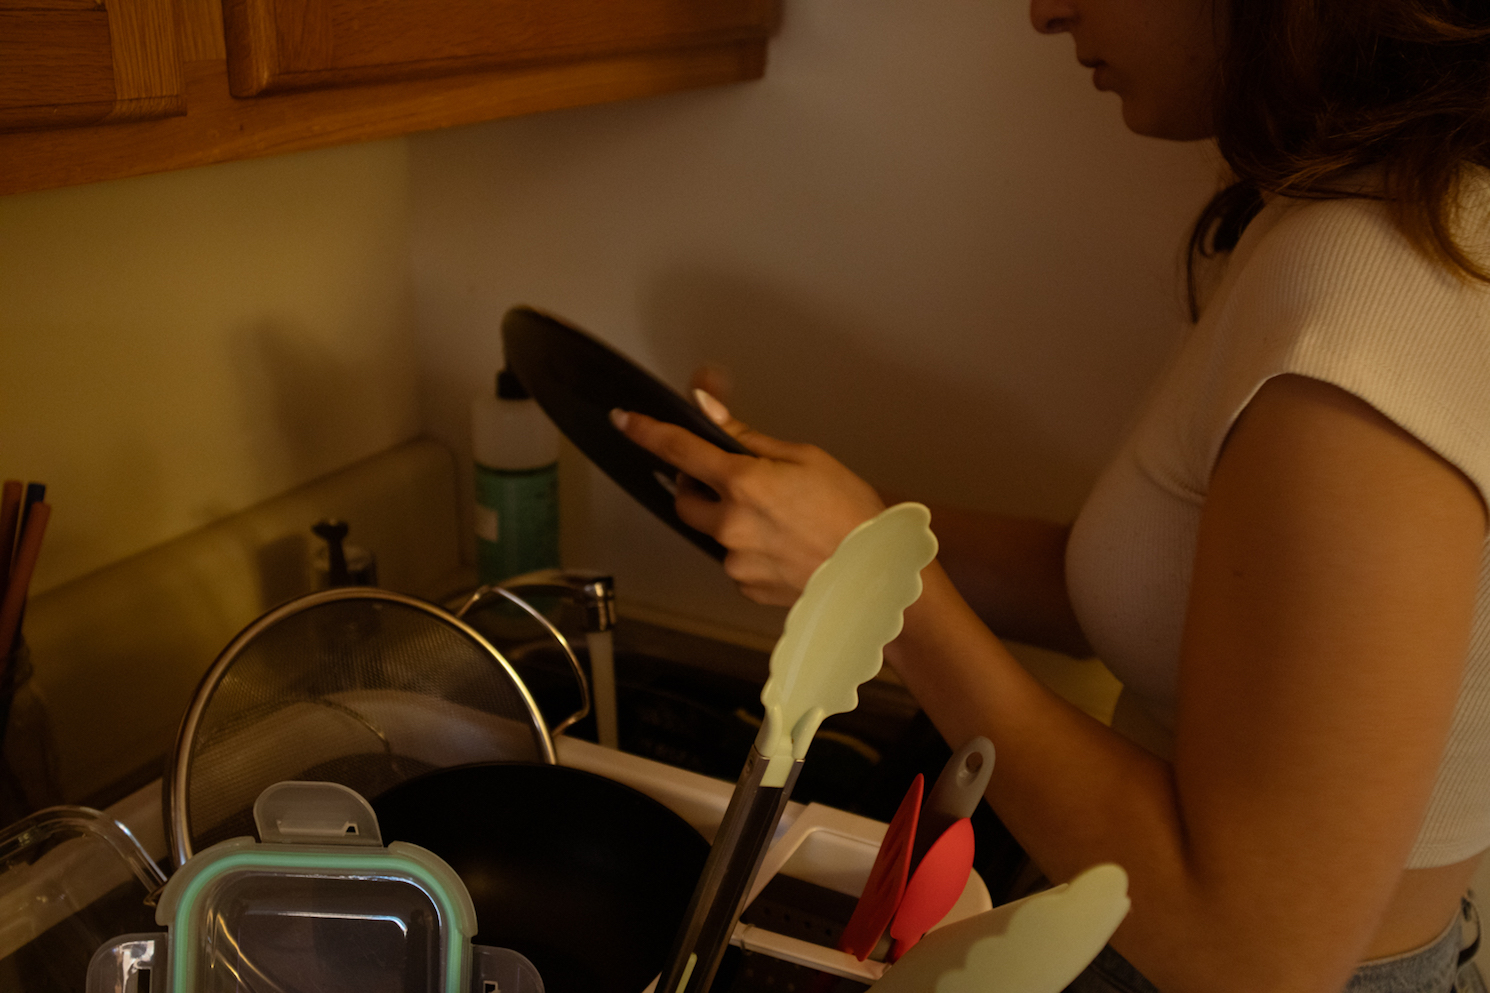 A person washing a plate with a sink full of dishes.